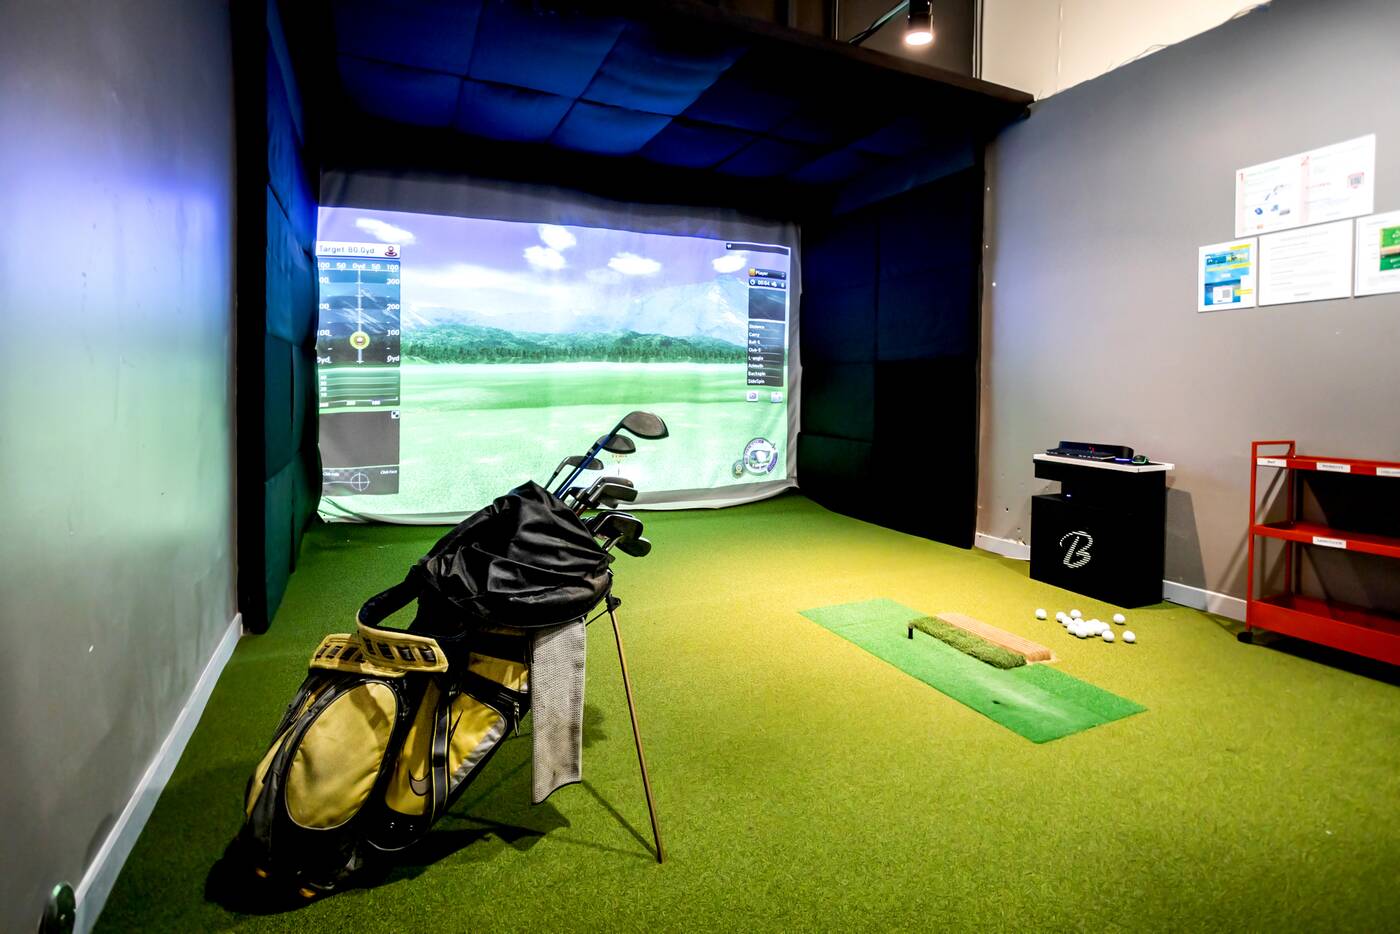 Golf enthusiasts and newbies can practice year-round at Ontario's